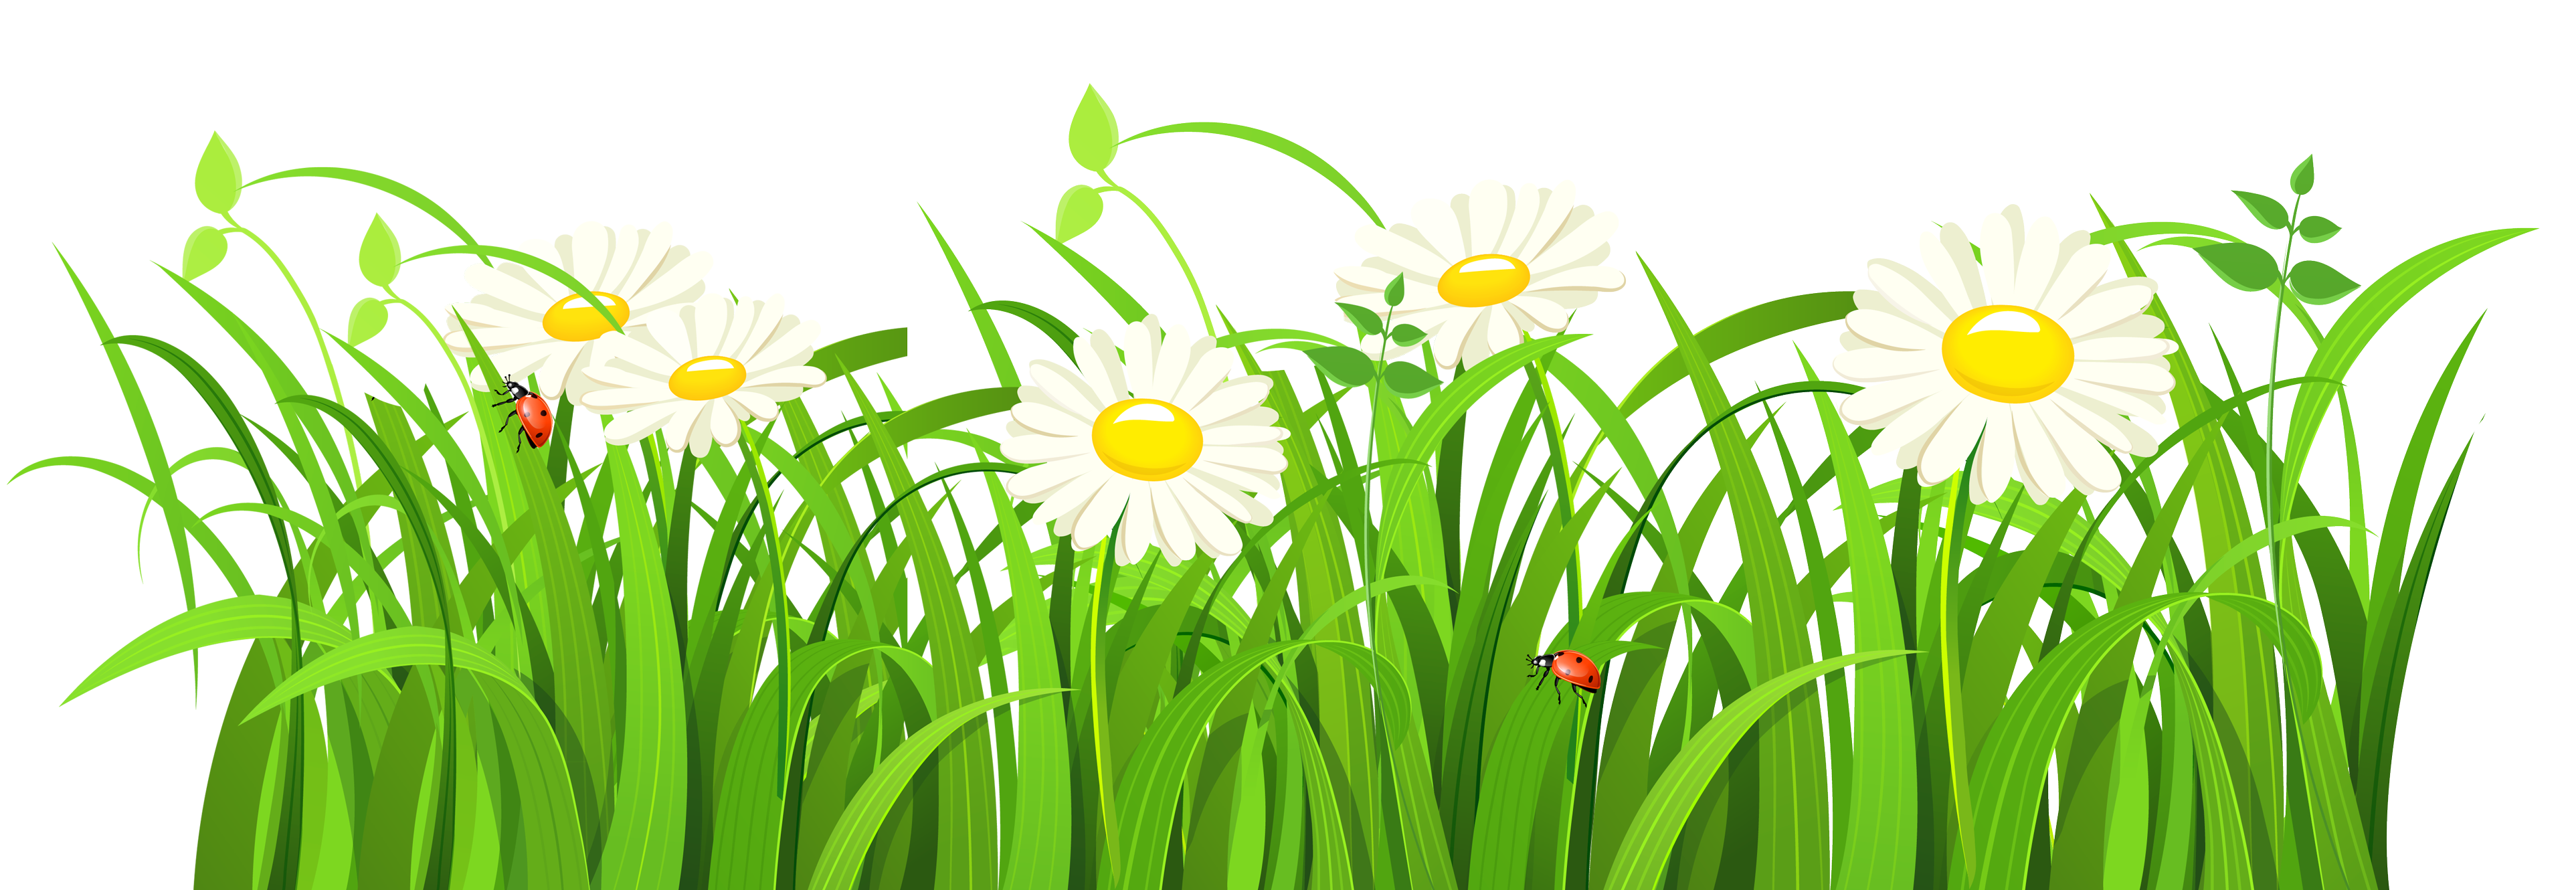 Grass Vector PNG Image - PurePNG | Free transparent CC0 PNG Image Library